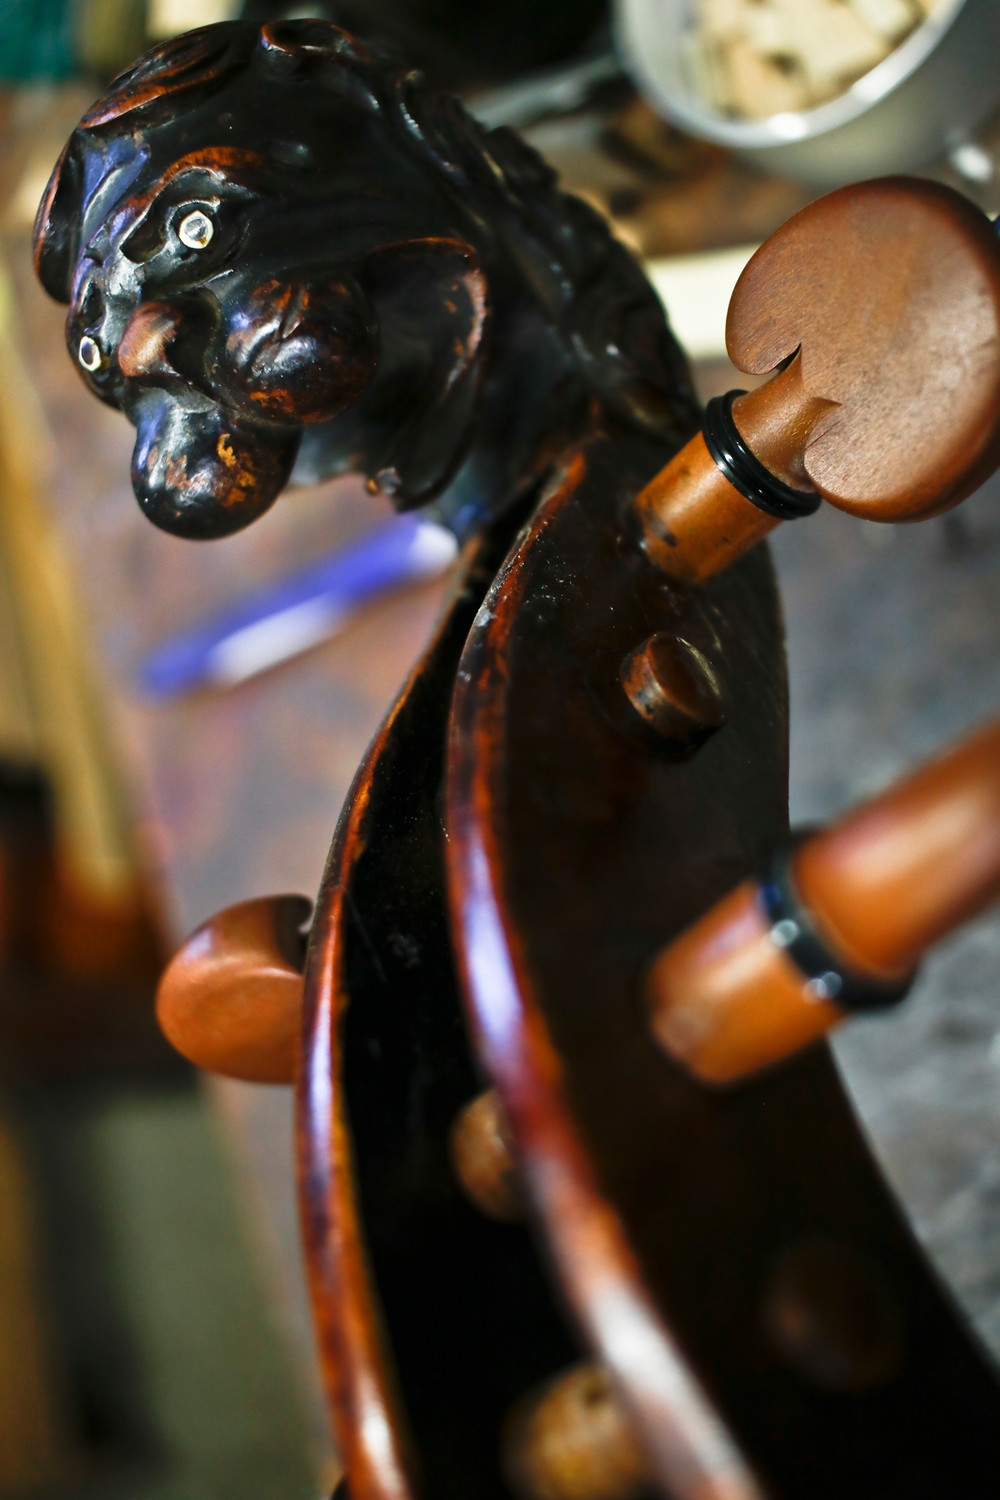 A Stainer Cello from the 1700s was the only one in the shop, with a uniquely carved lion’s head scroll.